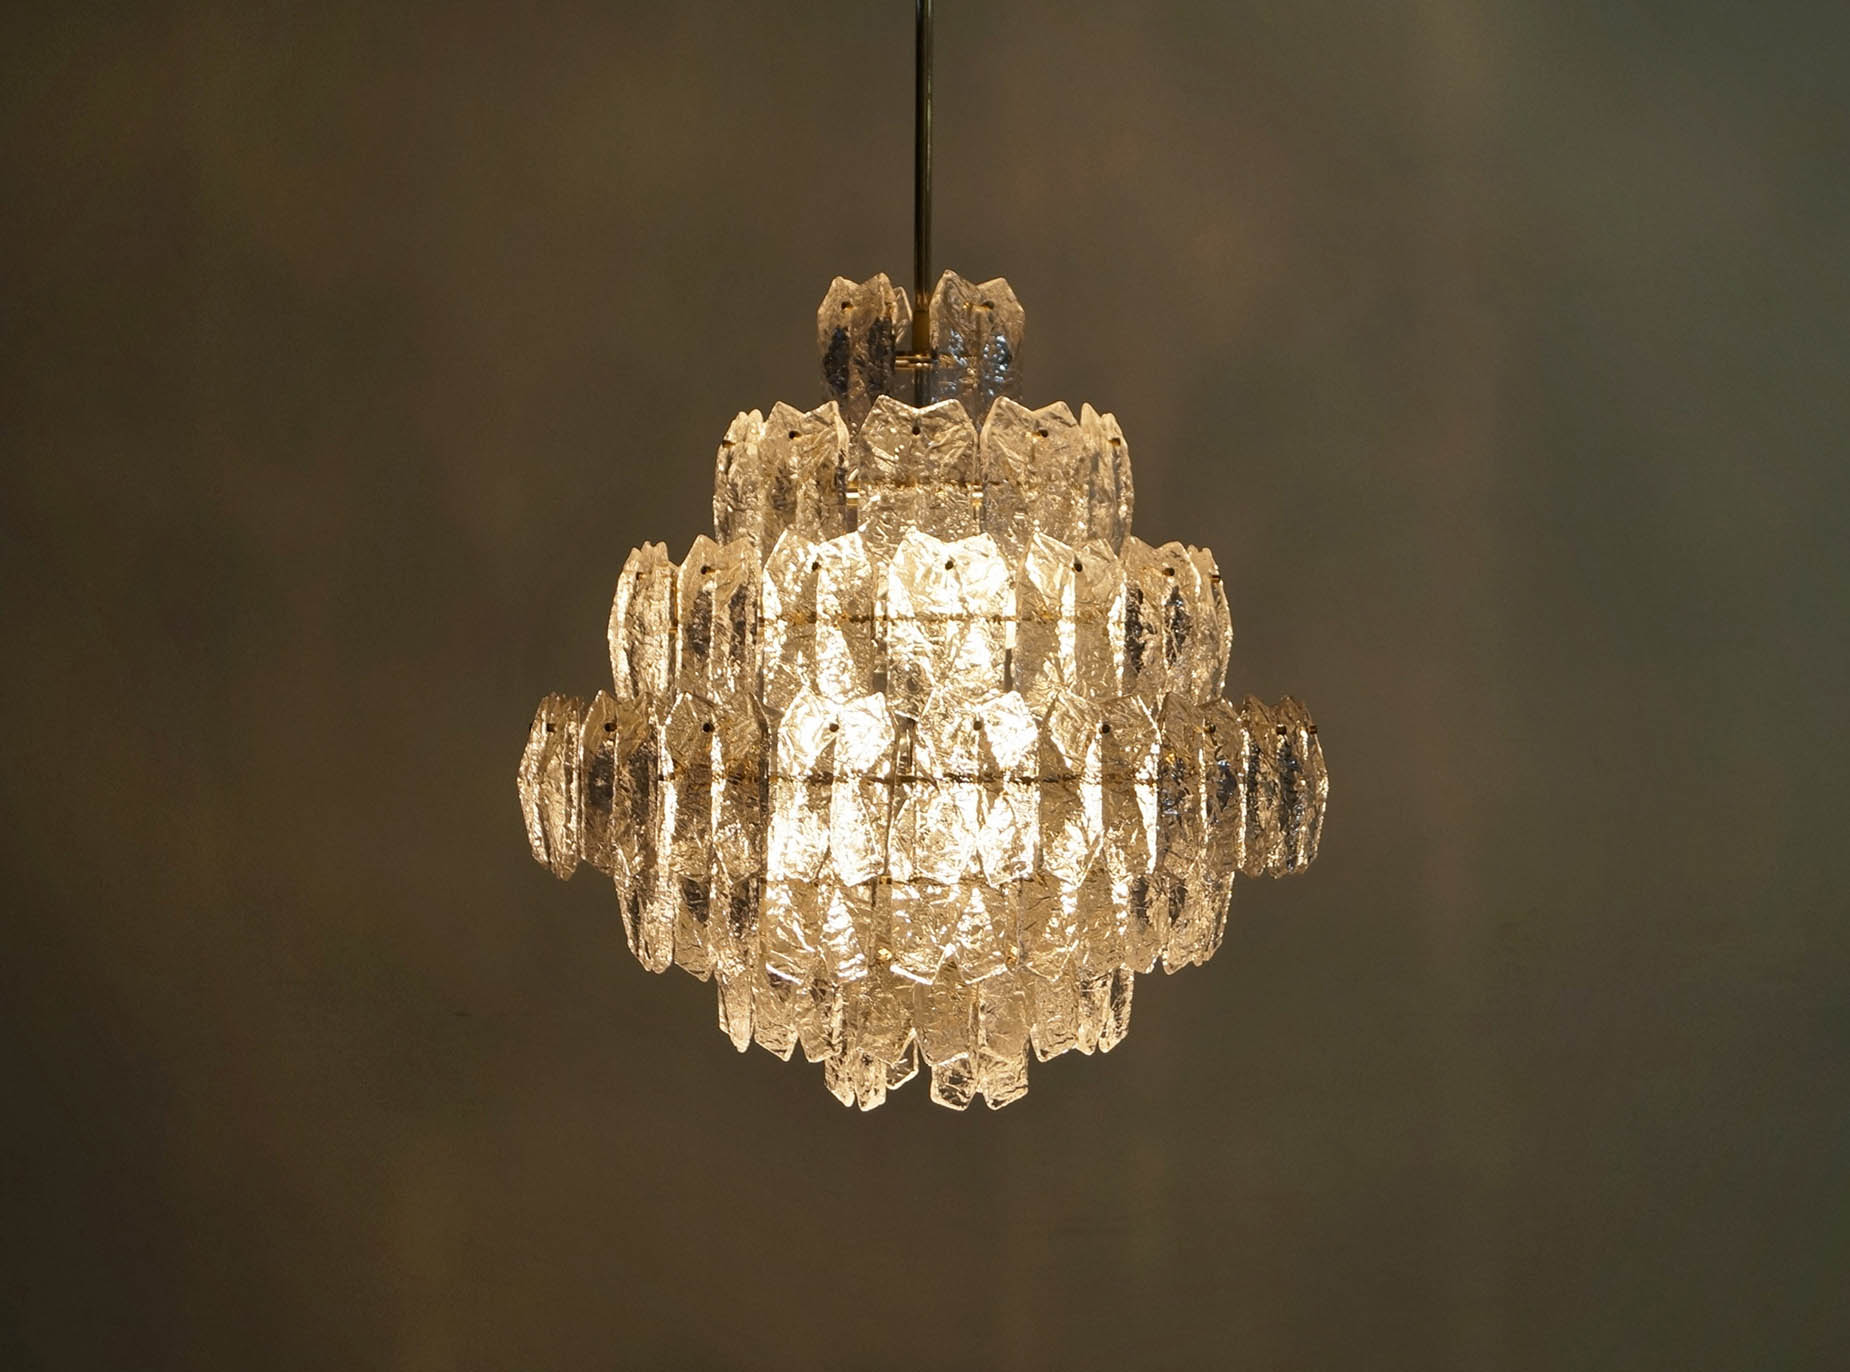 Exceptional Ice Glass Chandelier Attributed to Kalmar